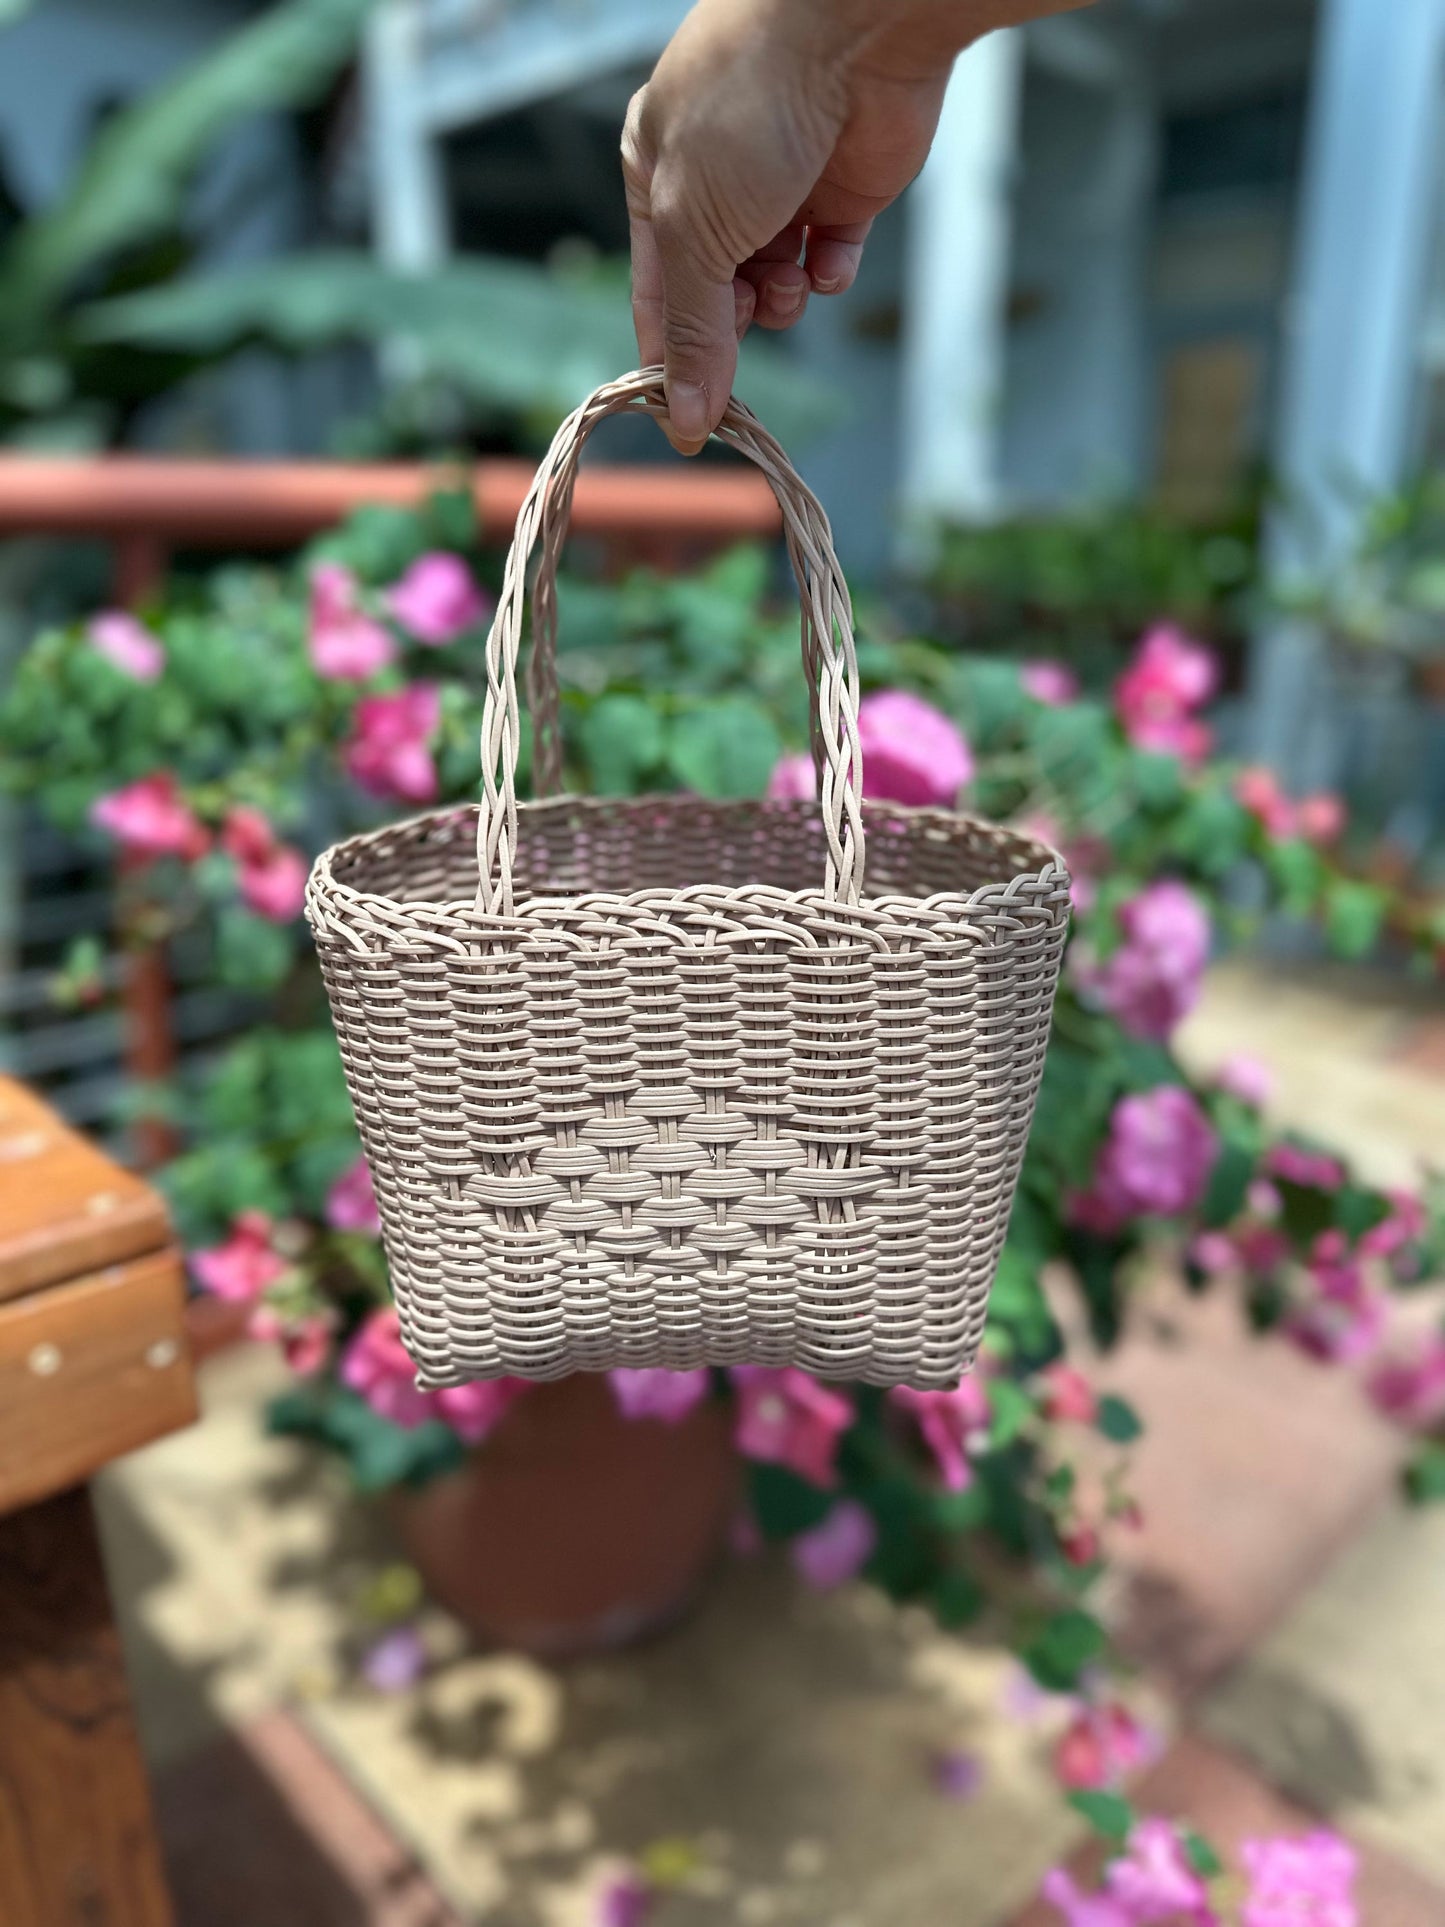 Guatemalan Handwoven Small Tote Bag, Recycled Plastic Bags